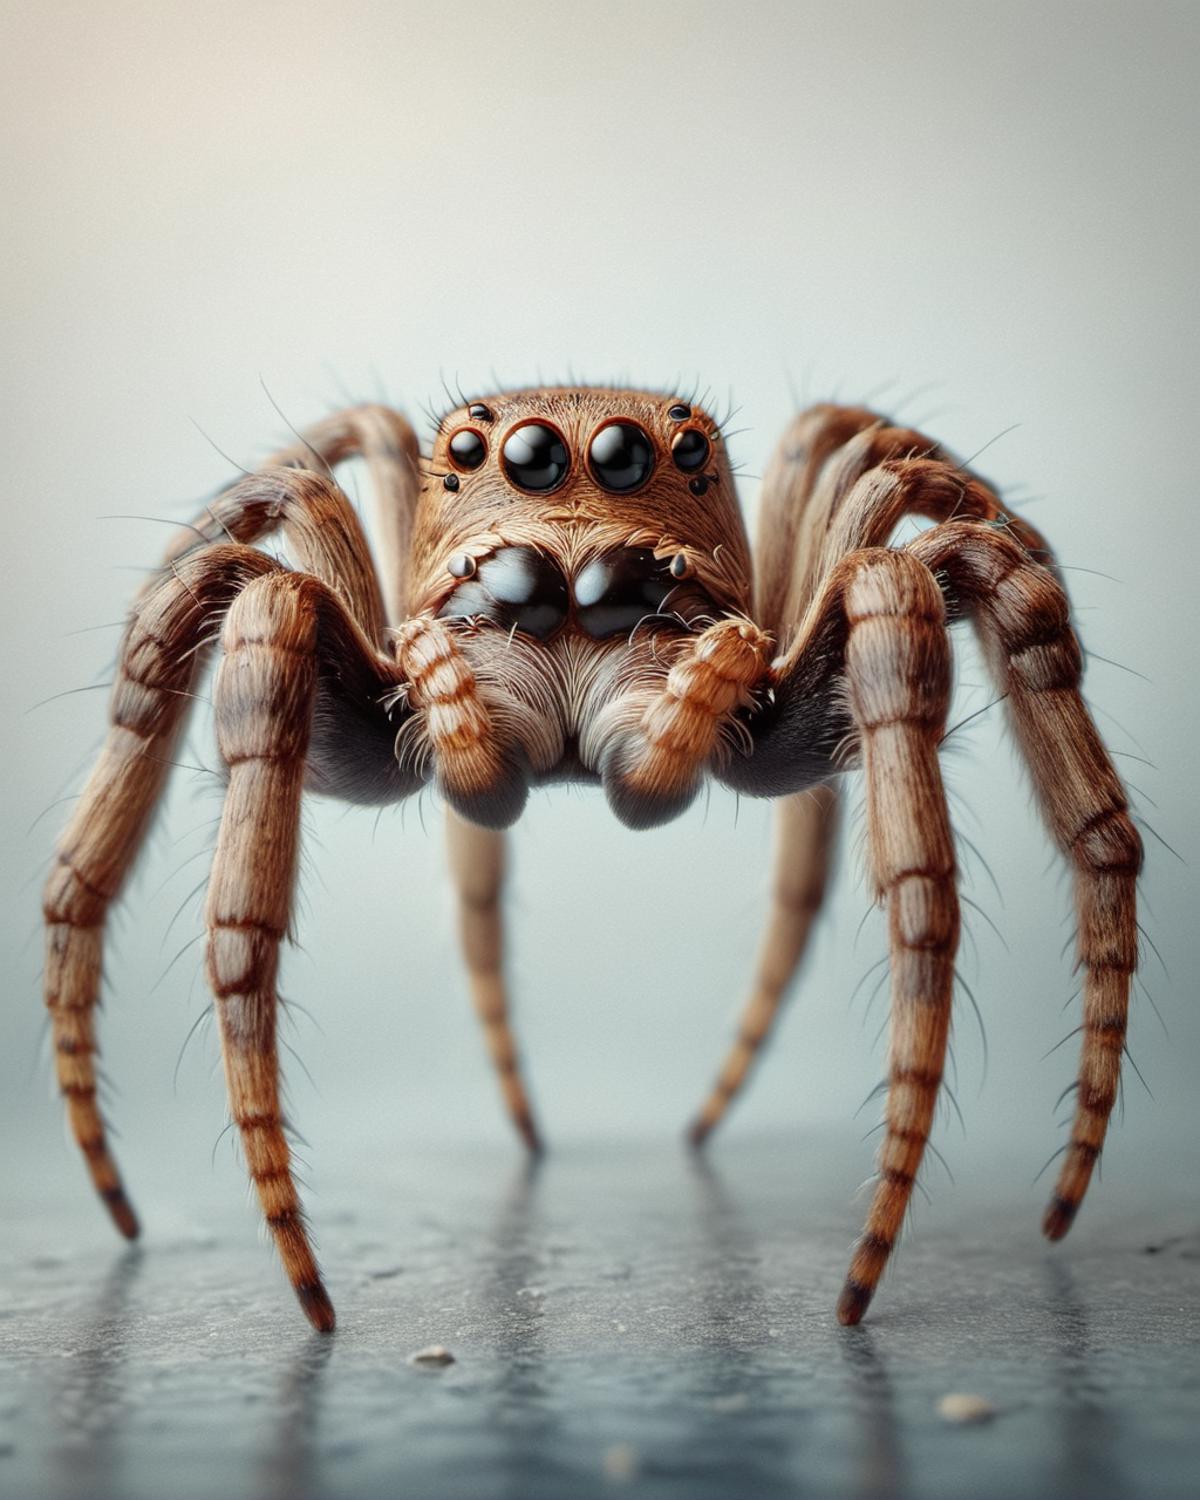 A close-up of a spider with large eyes, sitting on a gray surface.